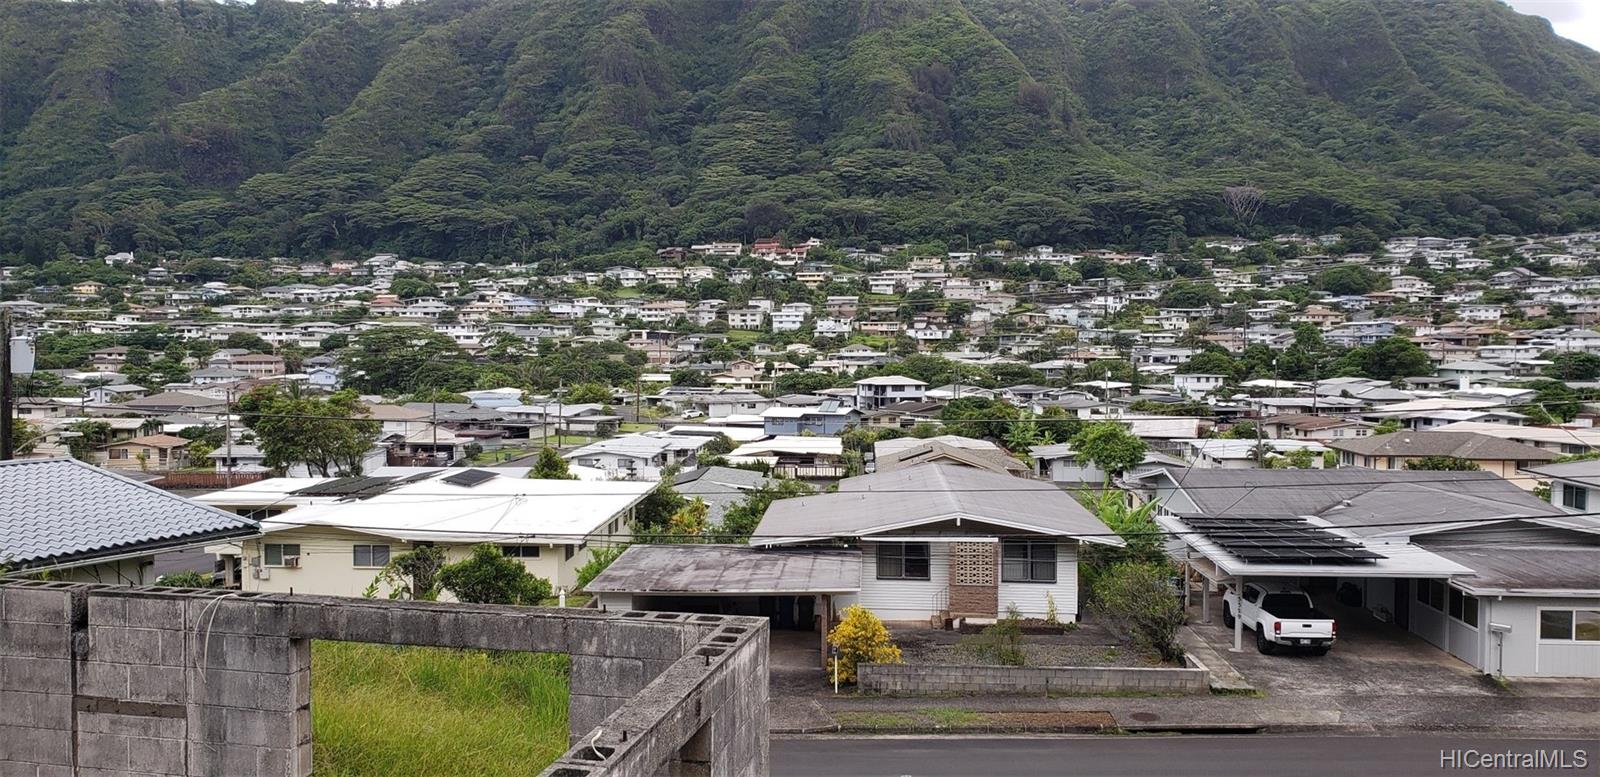 3338 Pinao Street  Honolulu, Hi vacant land for sale - photo 4 of 7